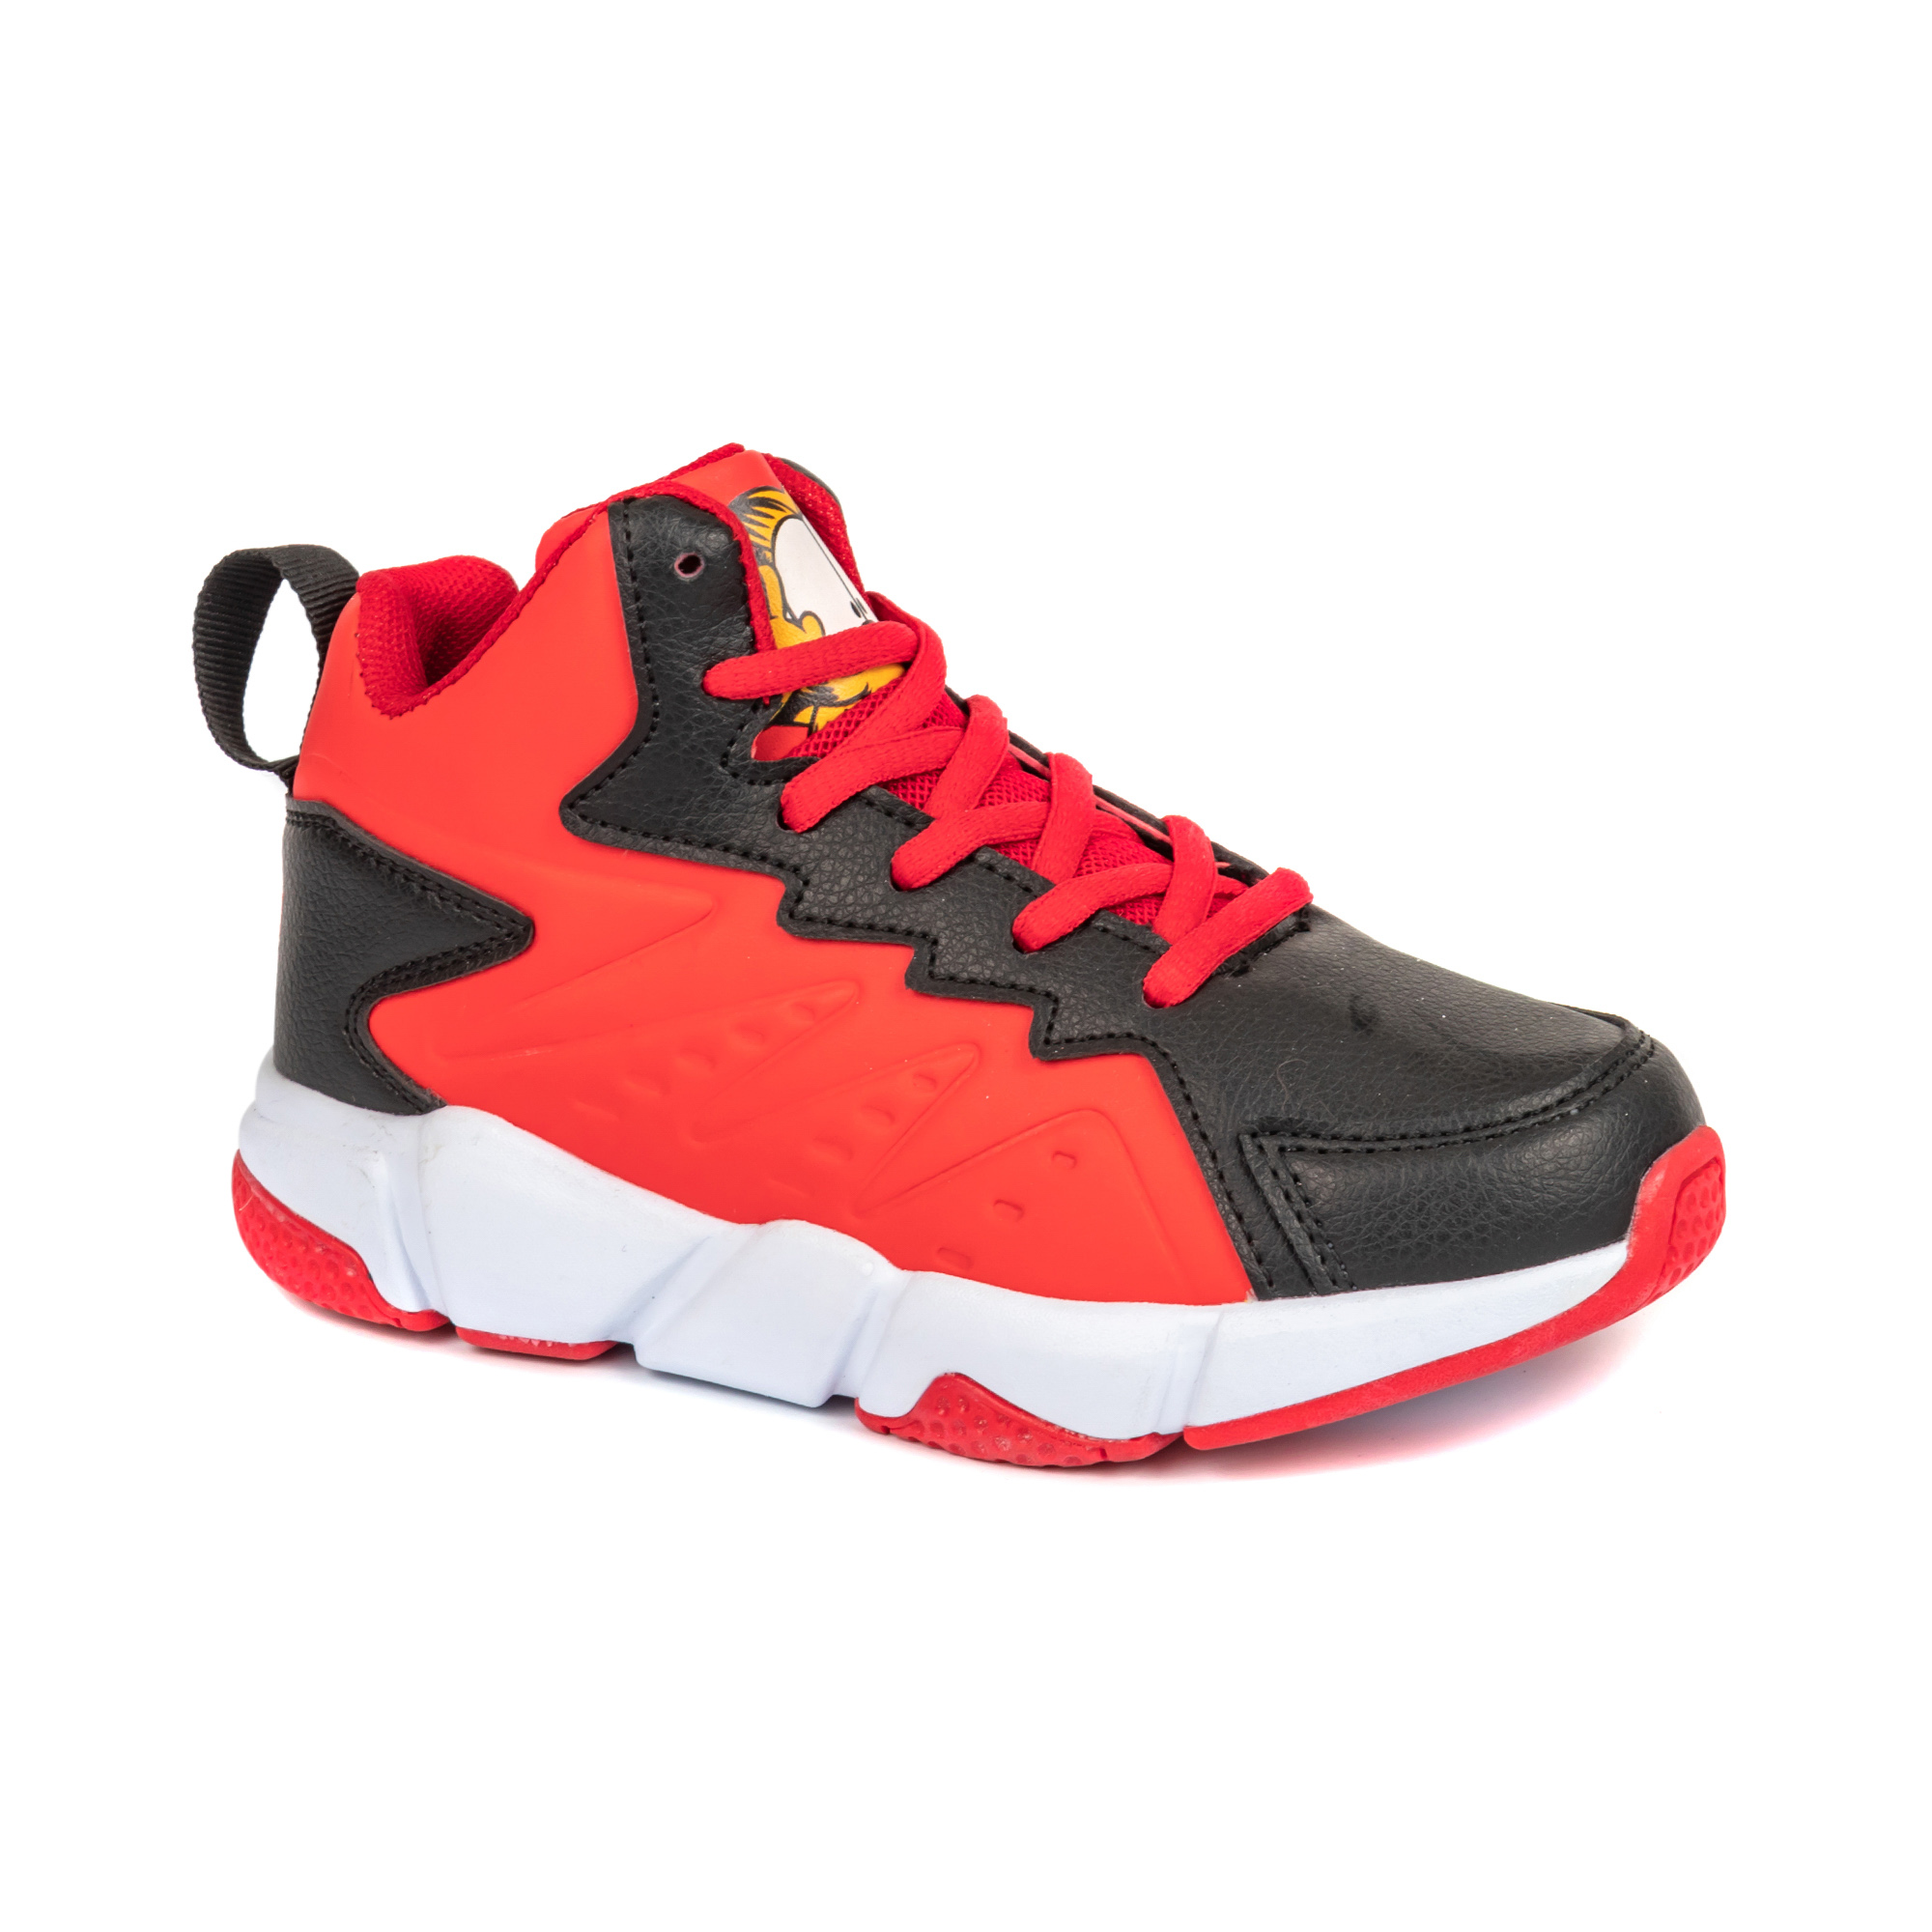 Sport shoes,Basketball Shoes,Children shoes,Red/Black,PU Upper +VELCRO +EVA Outsole